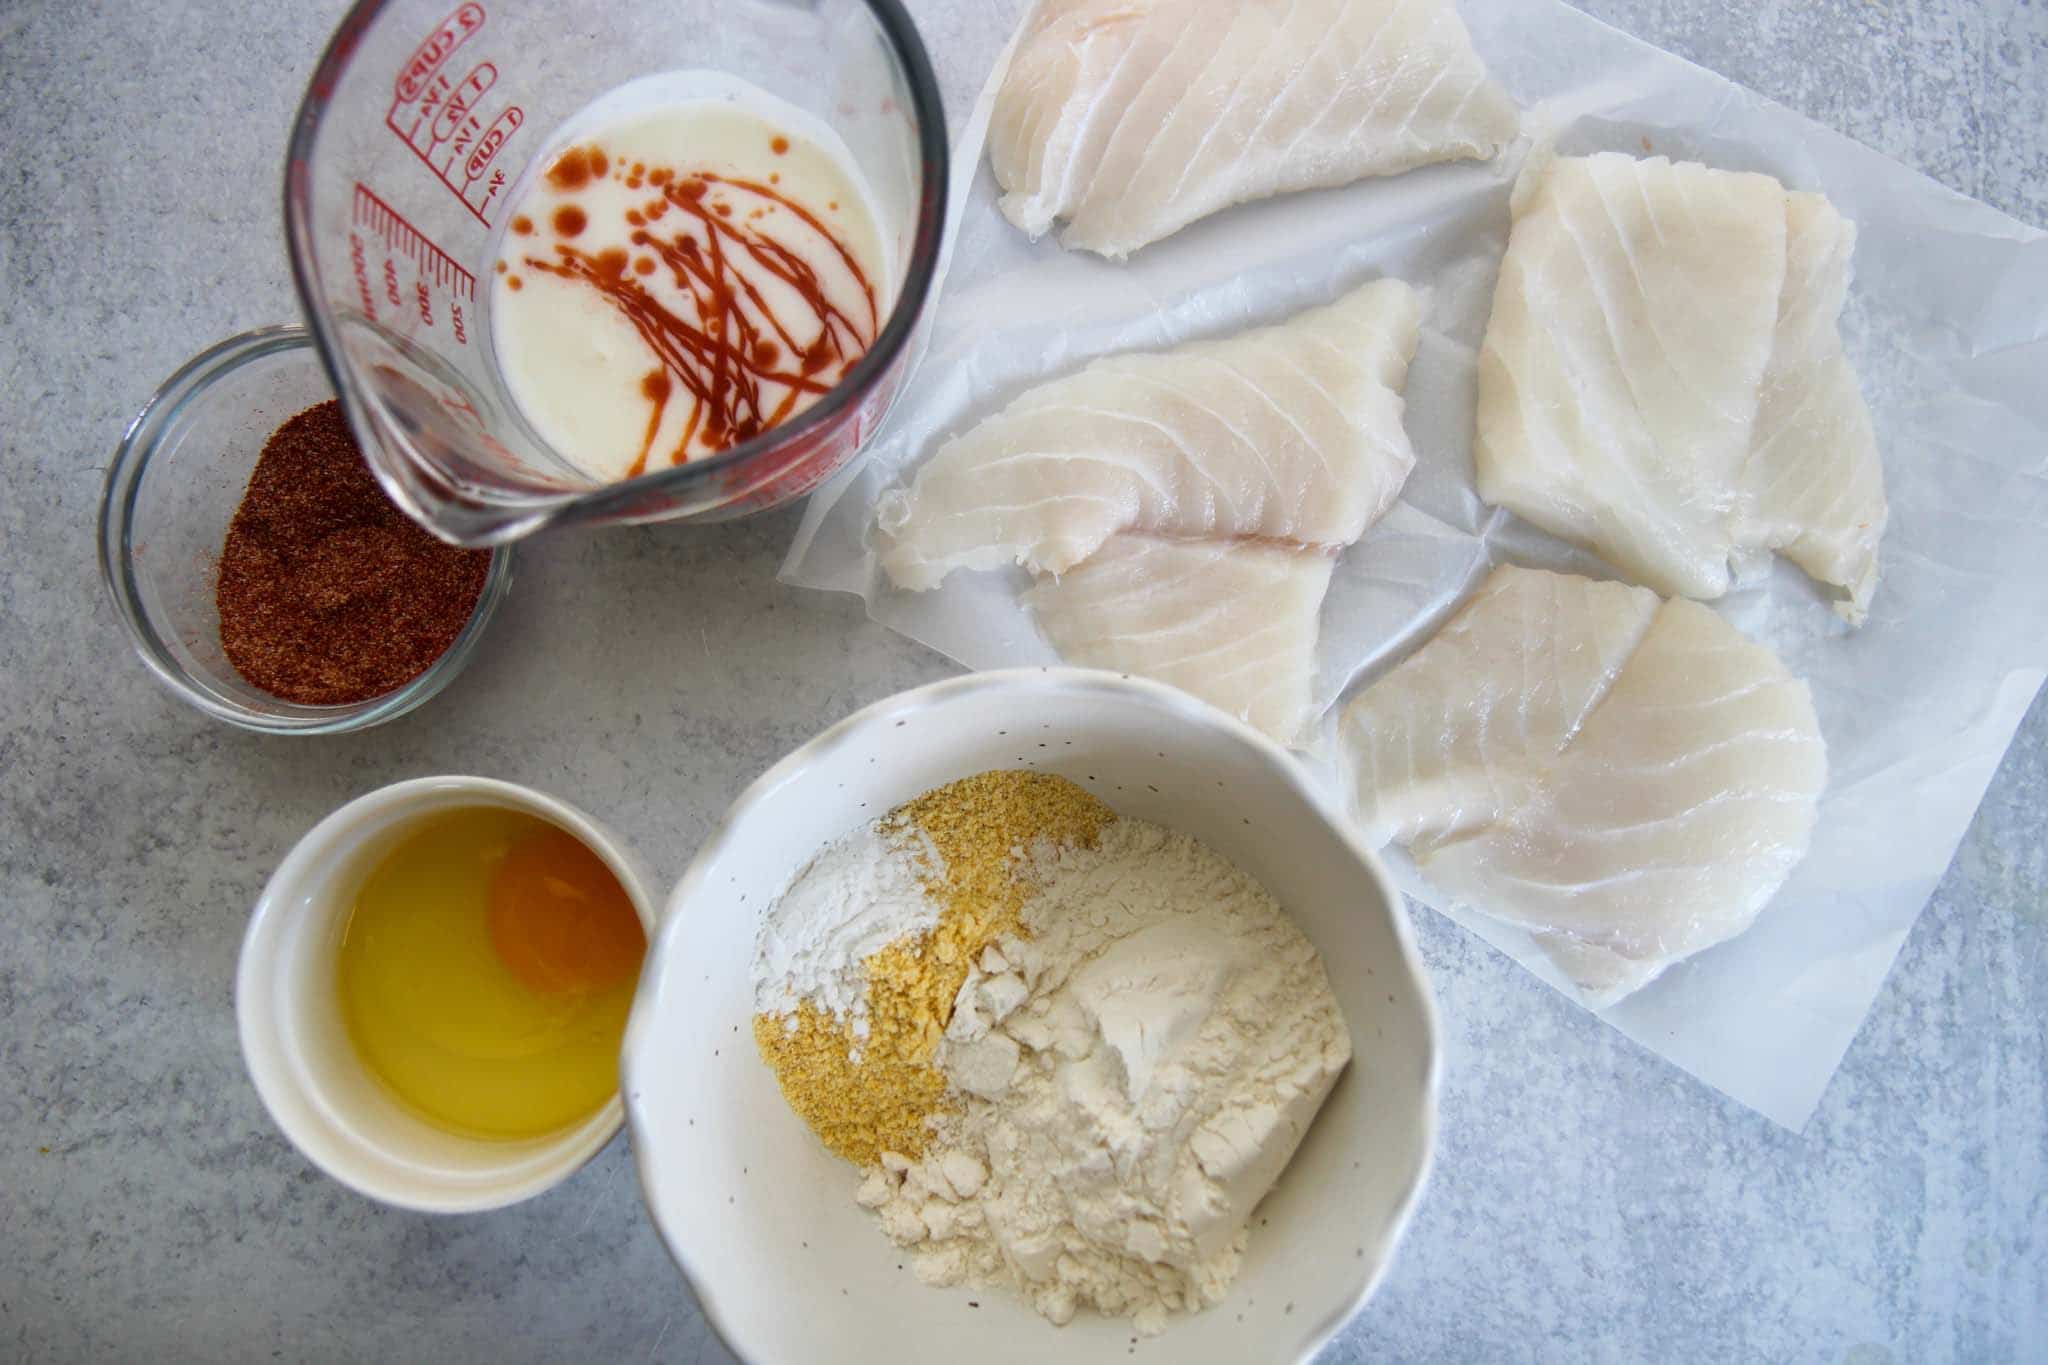 ingredients to make fried fish sandwiches, spices, egg, flour, cornmeal, cod, buttermilk, hot sauce, and baking powder. 